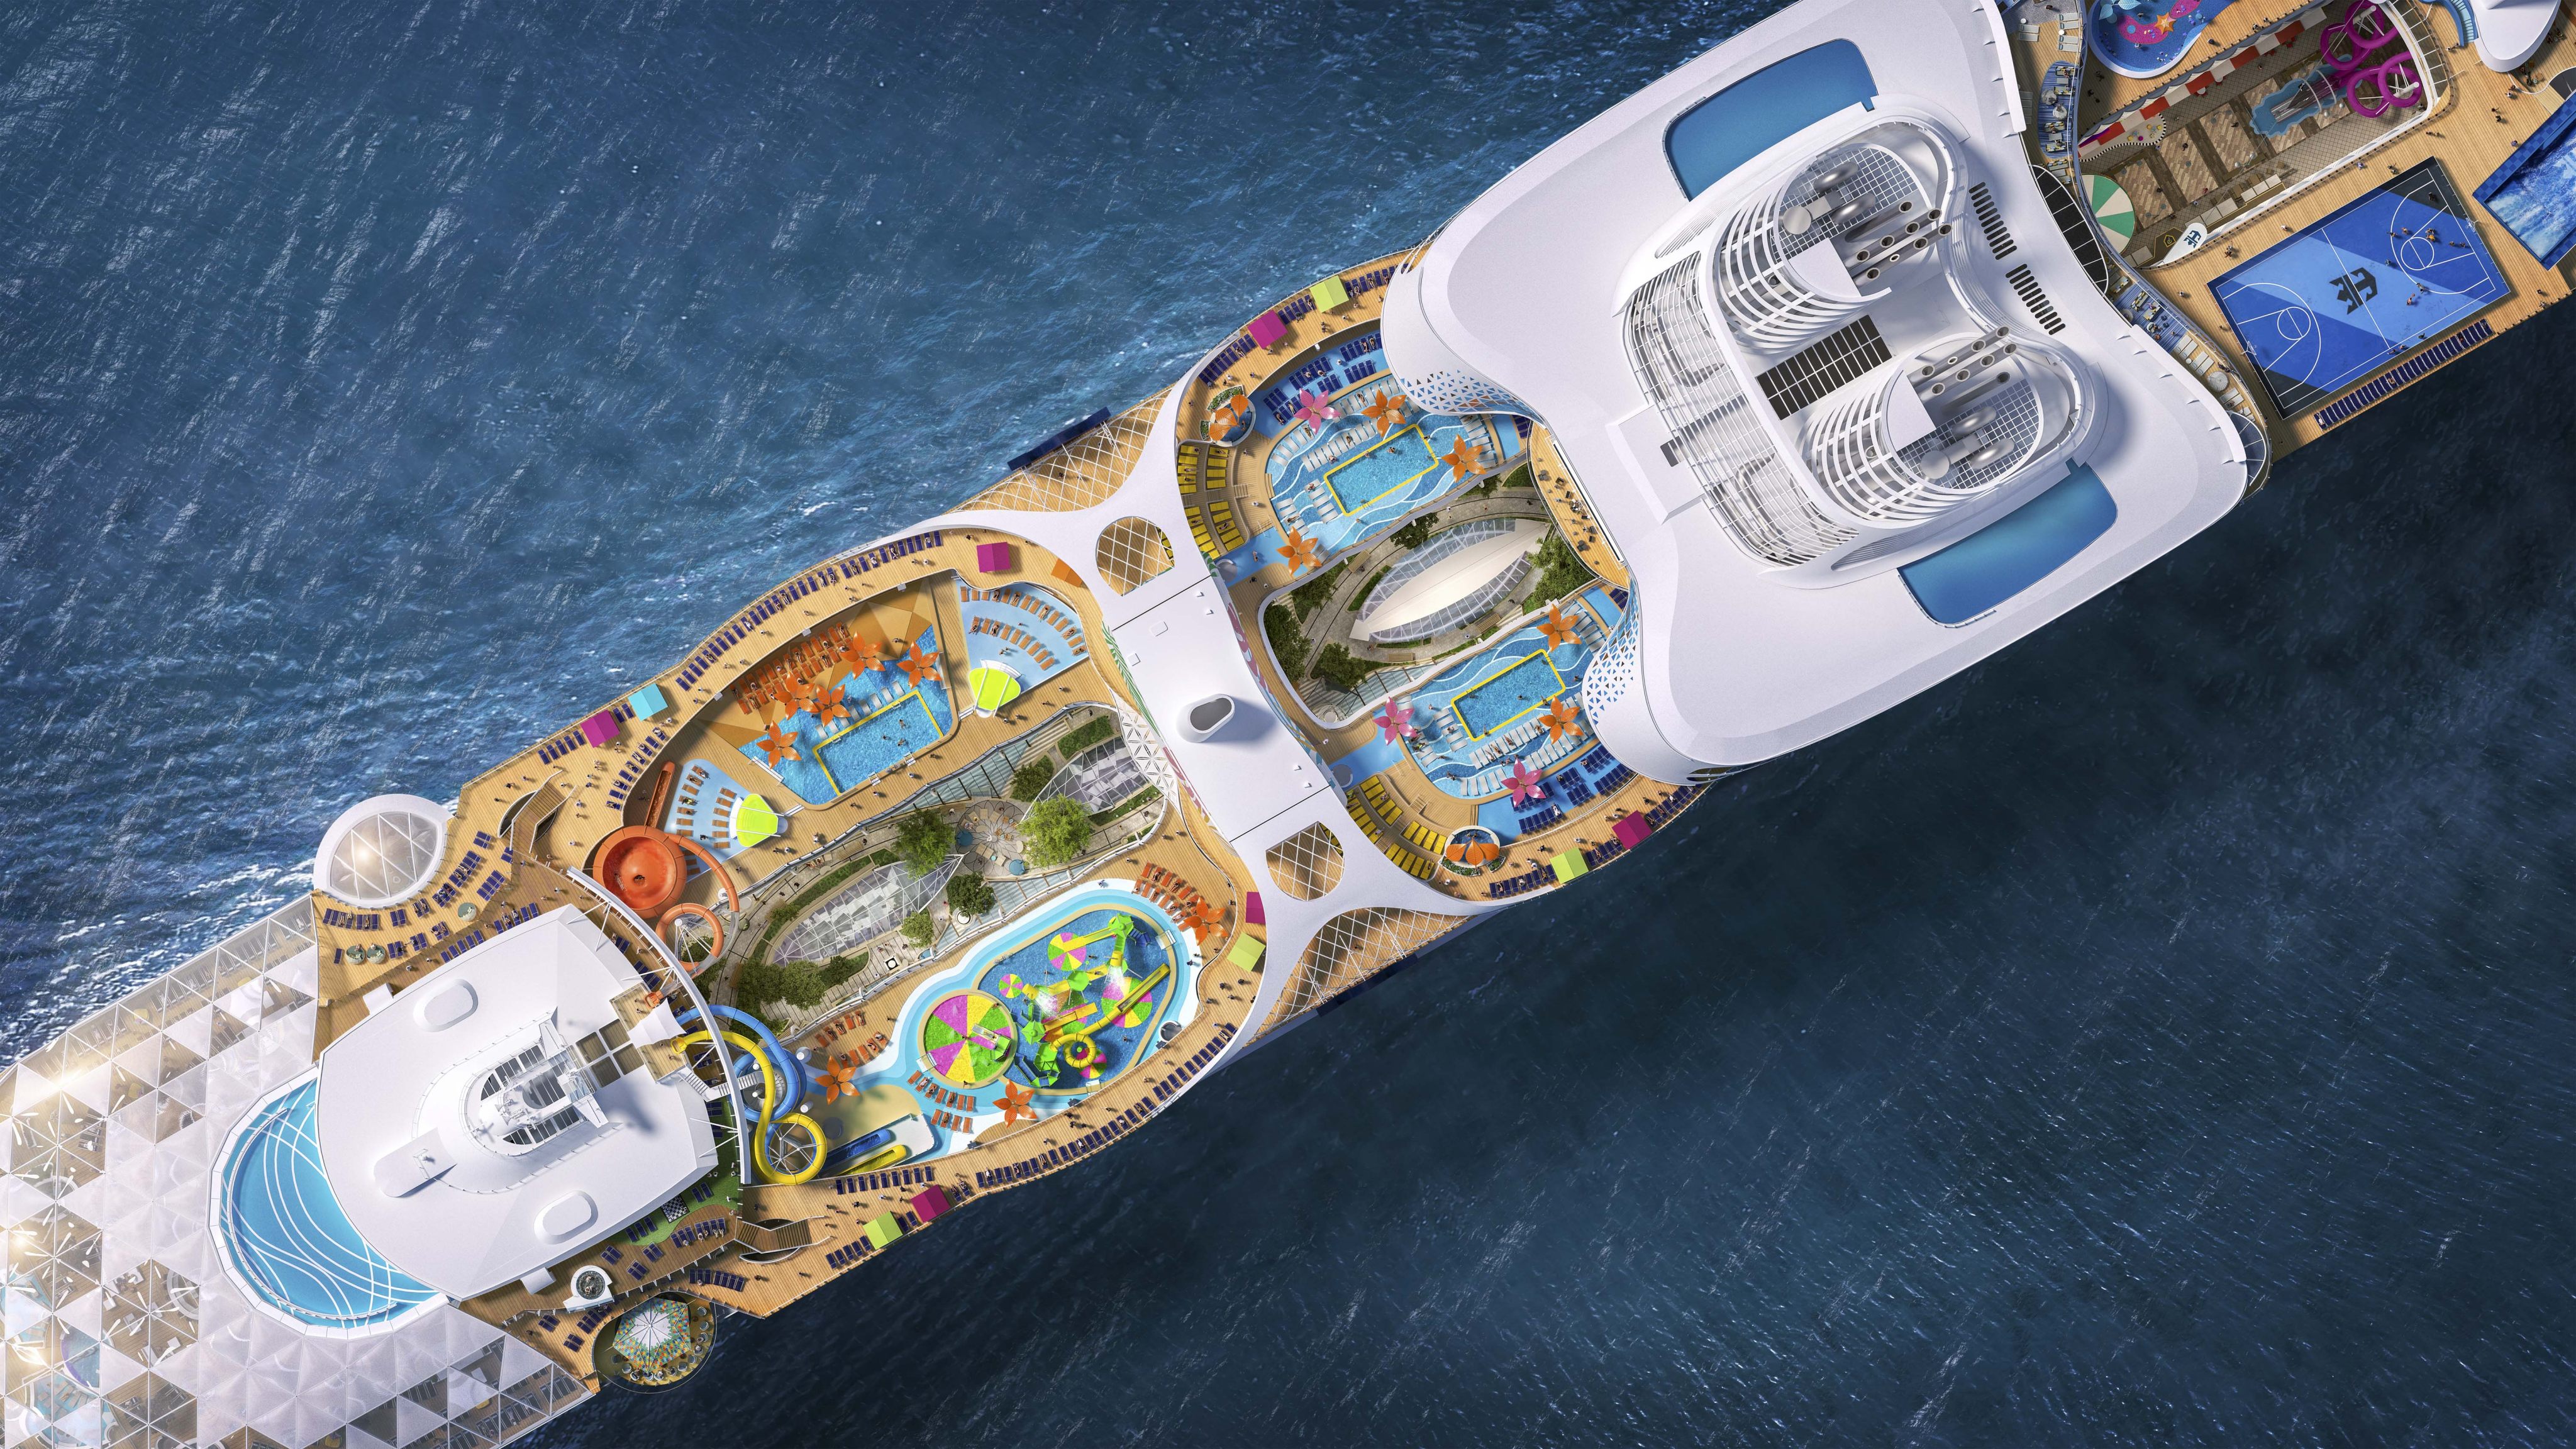 Royal Caribbean’s epic Icon of the Seas boasts 20 decks and, coming in at 1,198 feet (365 metres) long and 250,800 tons, the cruiseliner will be able to hold more than 7,000 people. Photos: Handout